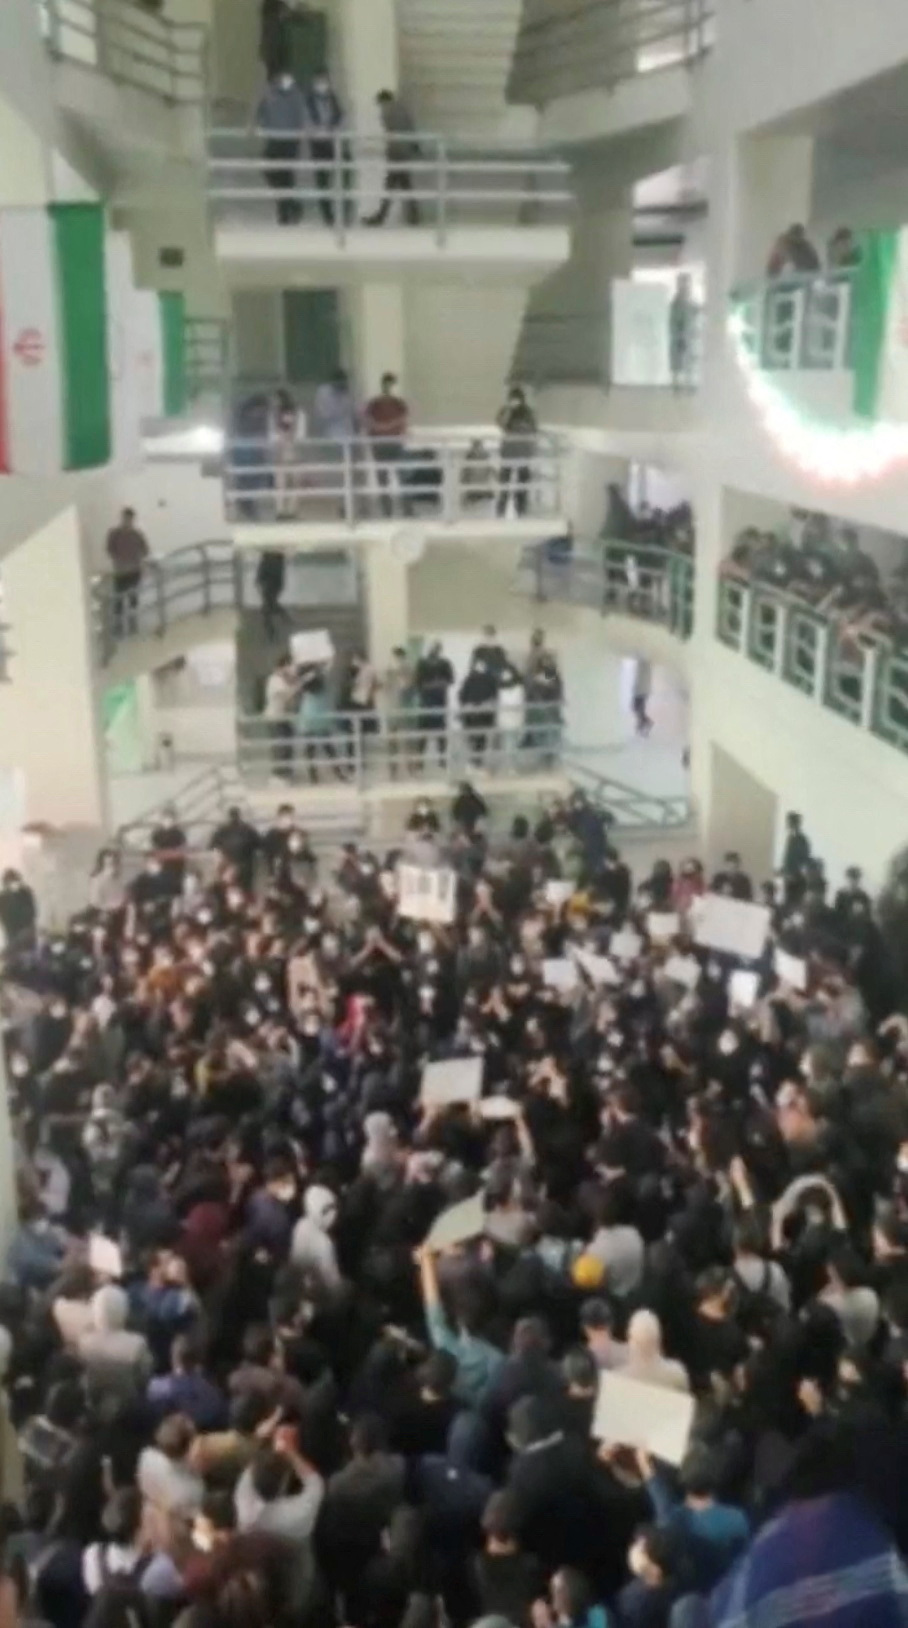 Universities became the epicenter of protests in Iran (via Reuters)